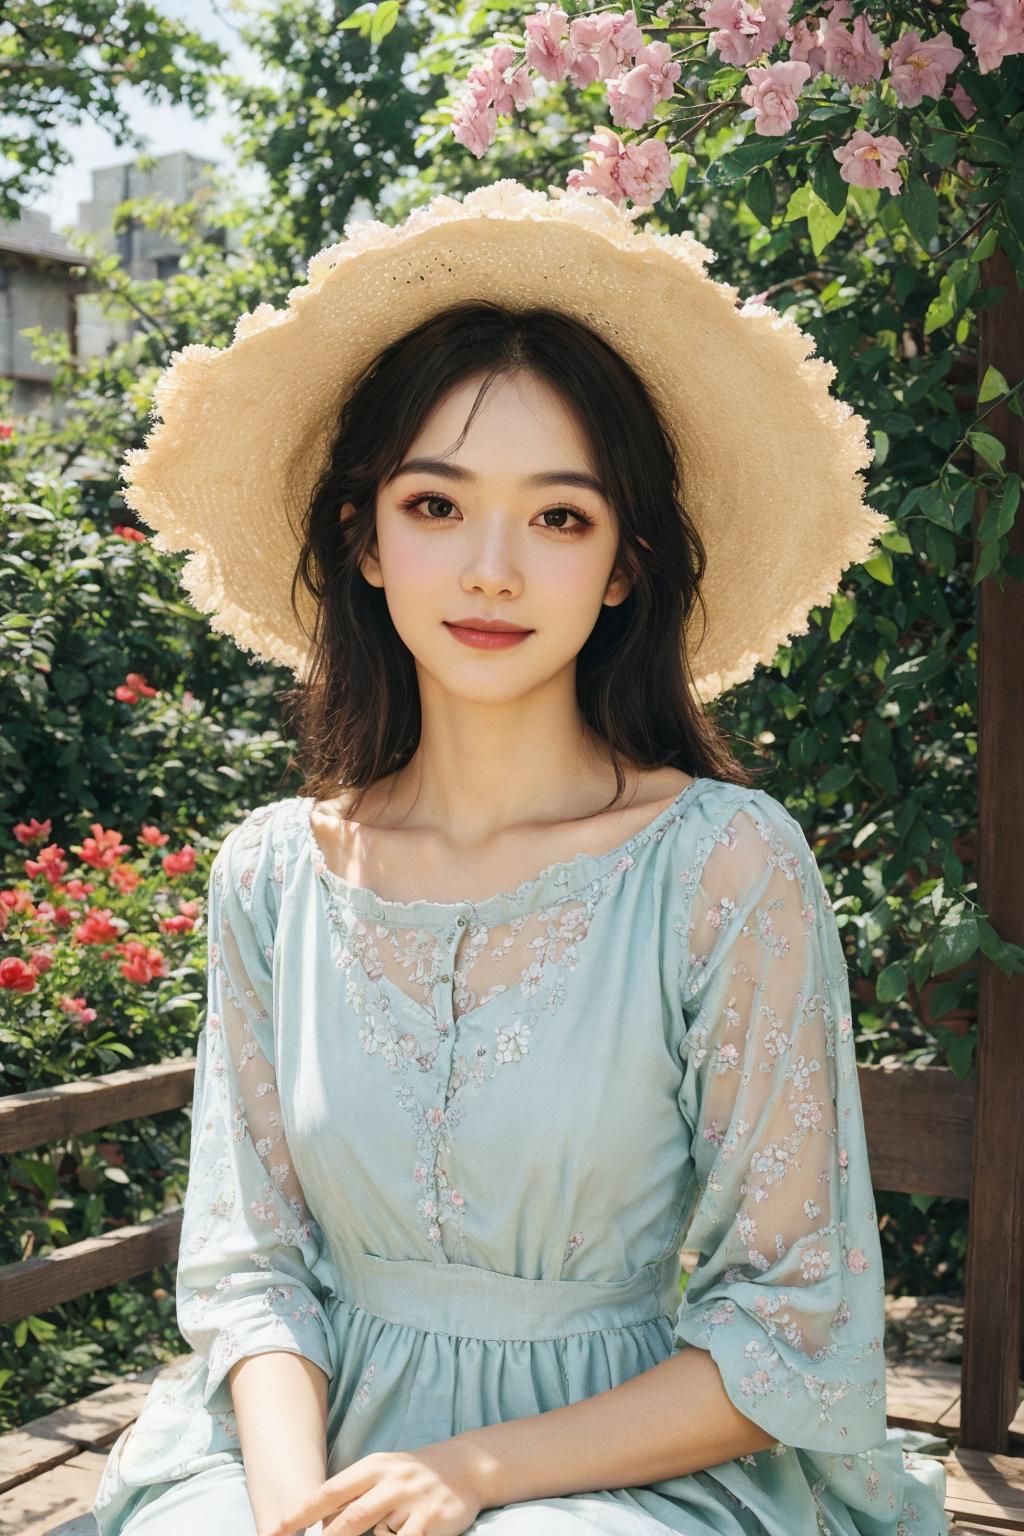 A young woman wearing a straw hat and a blue flowered dress poses for the camera.